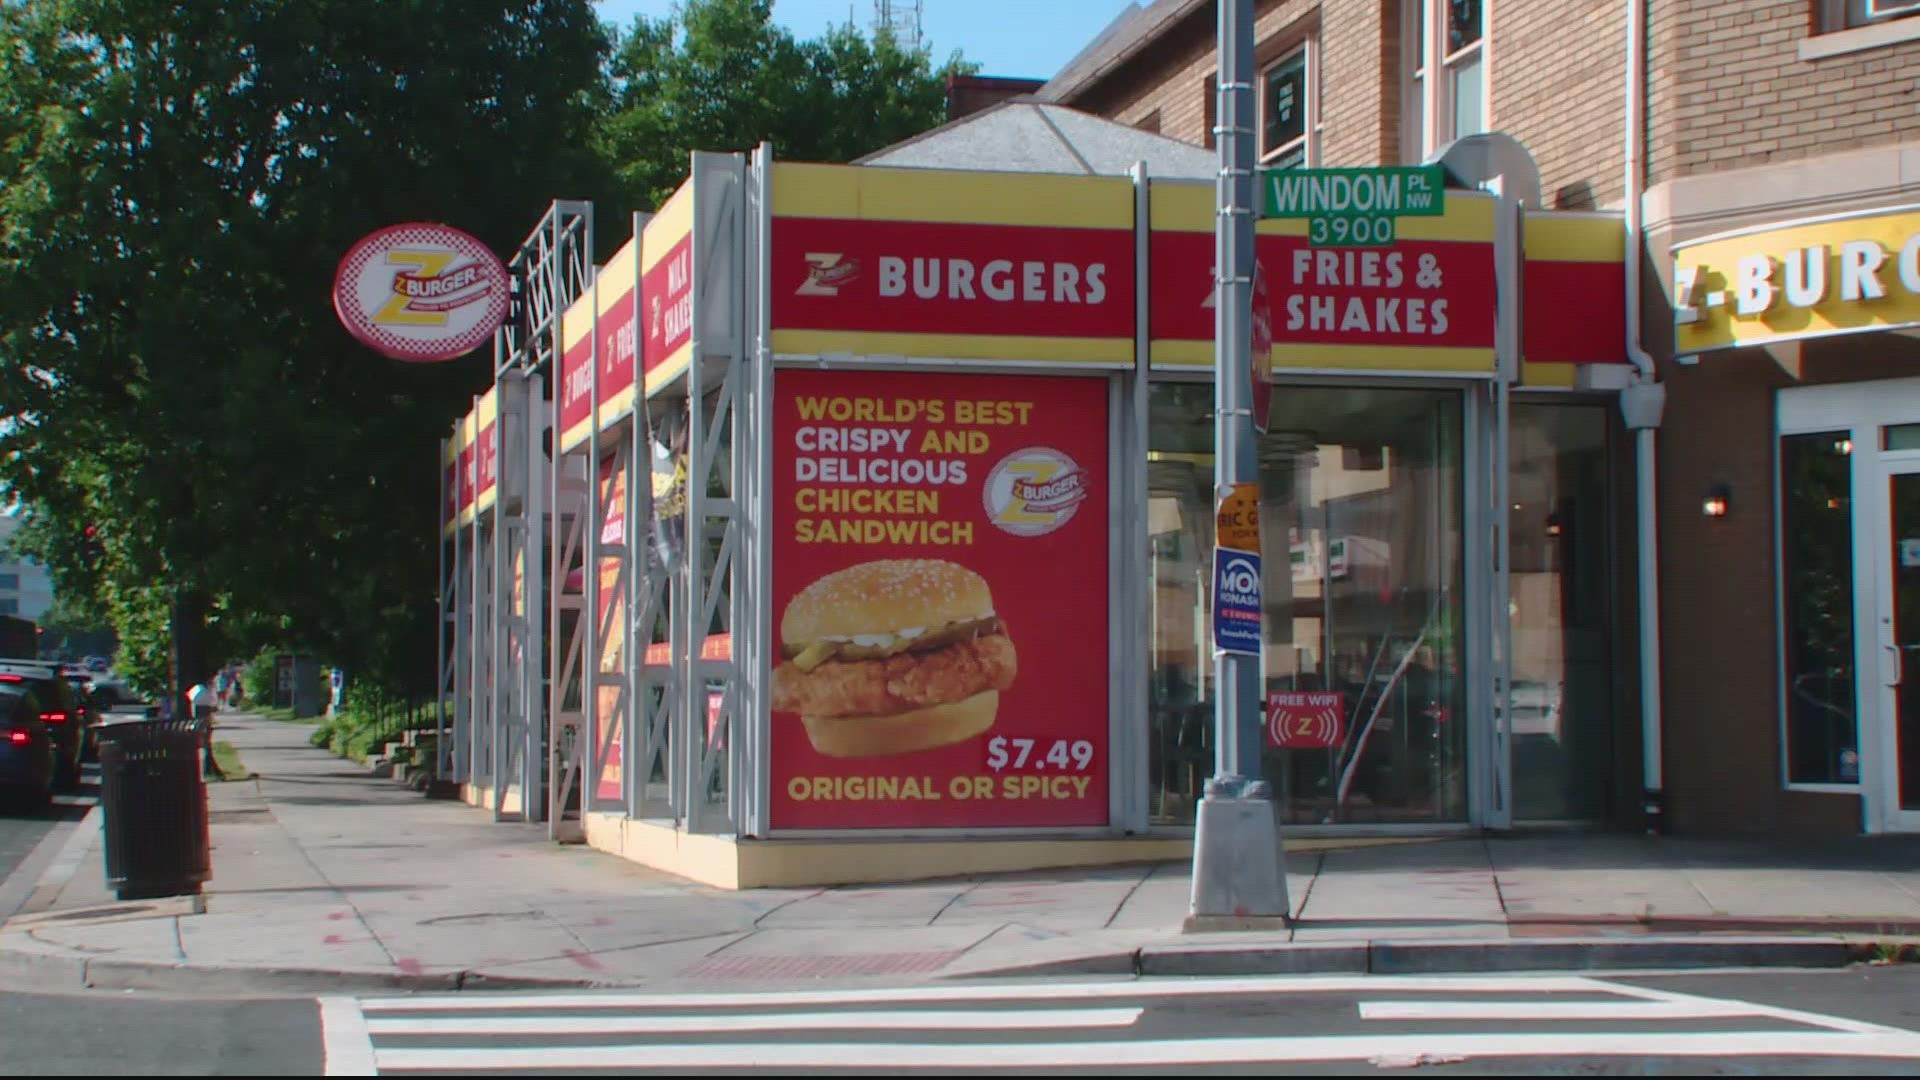 Z-Burger has been around the DC area since 2004, but it's concerned with McDonald's departure from Russia, similarly named restaurants could pop up overseas.